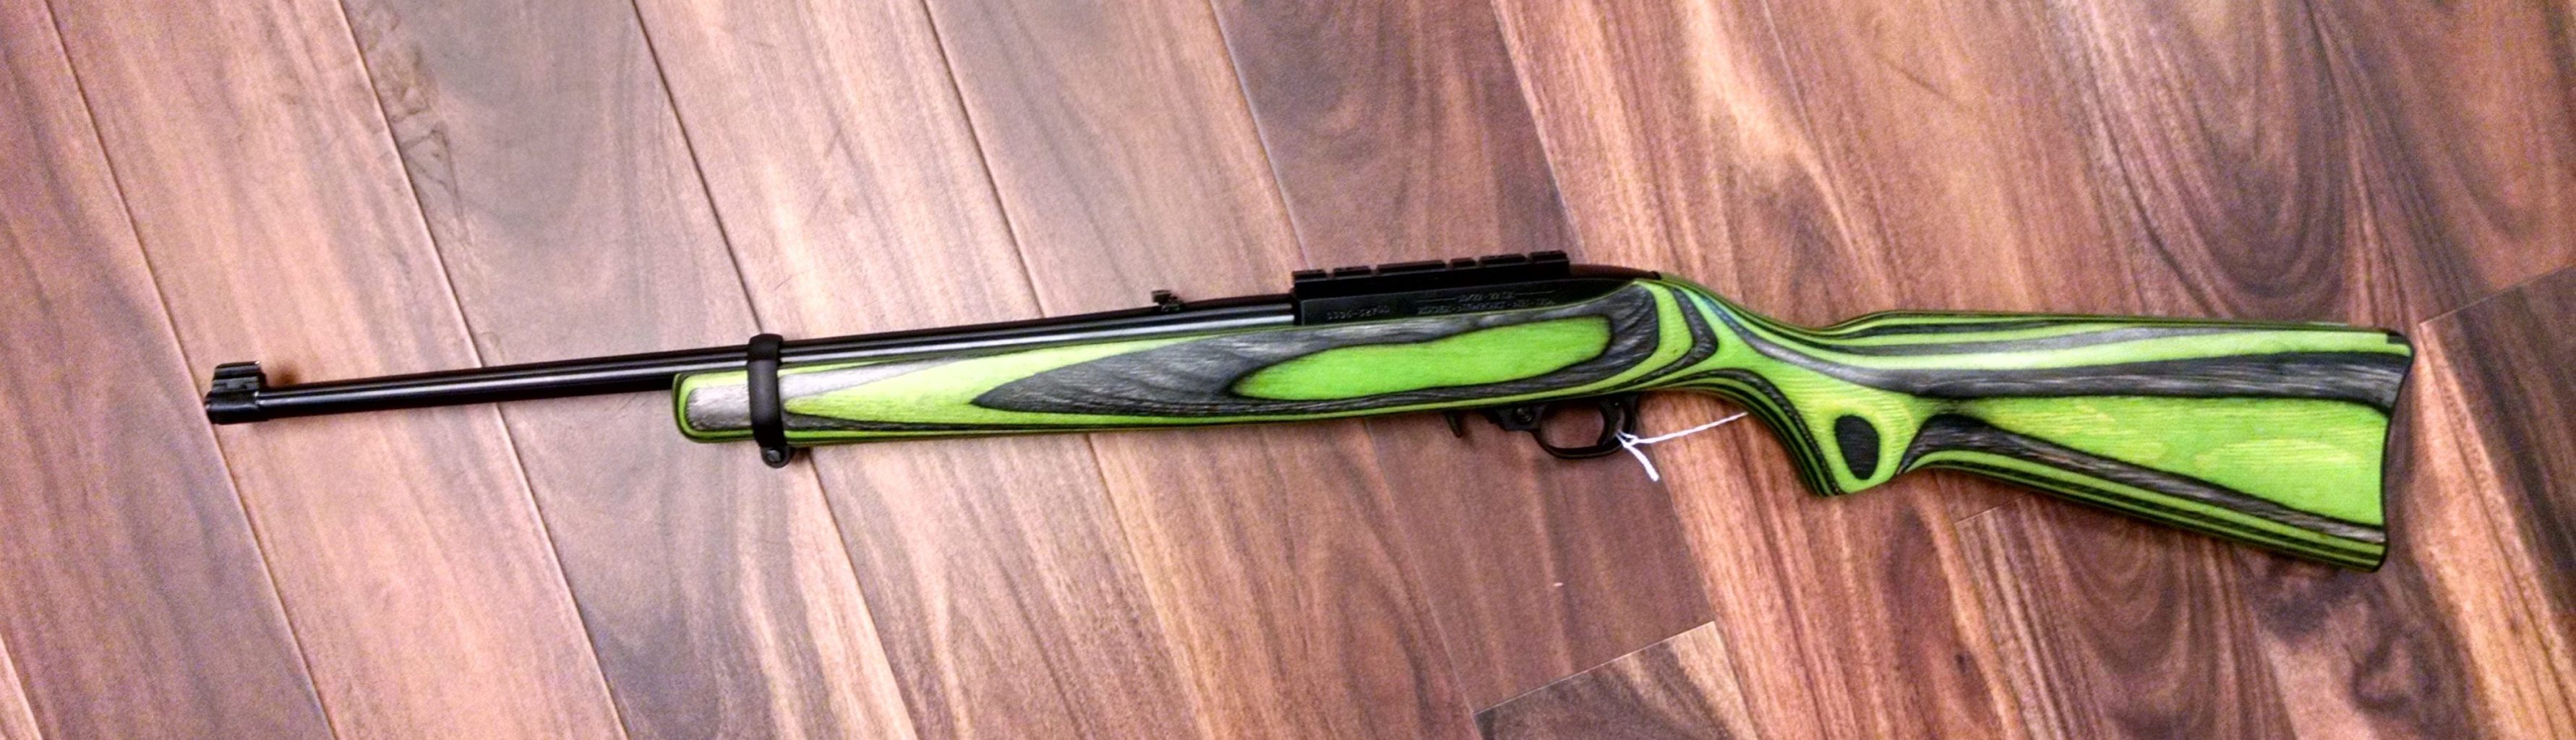 RUGER 10/22 GREEN BLACK .22LR RIFLE SPECIAL EDITION